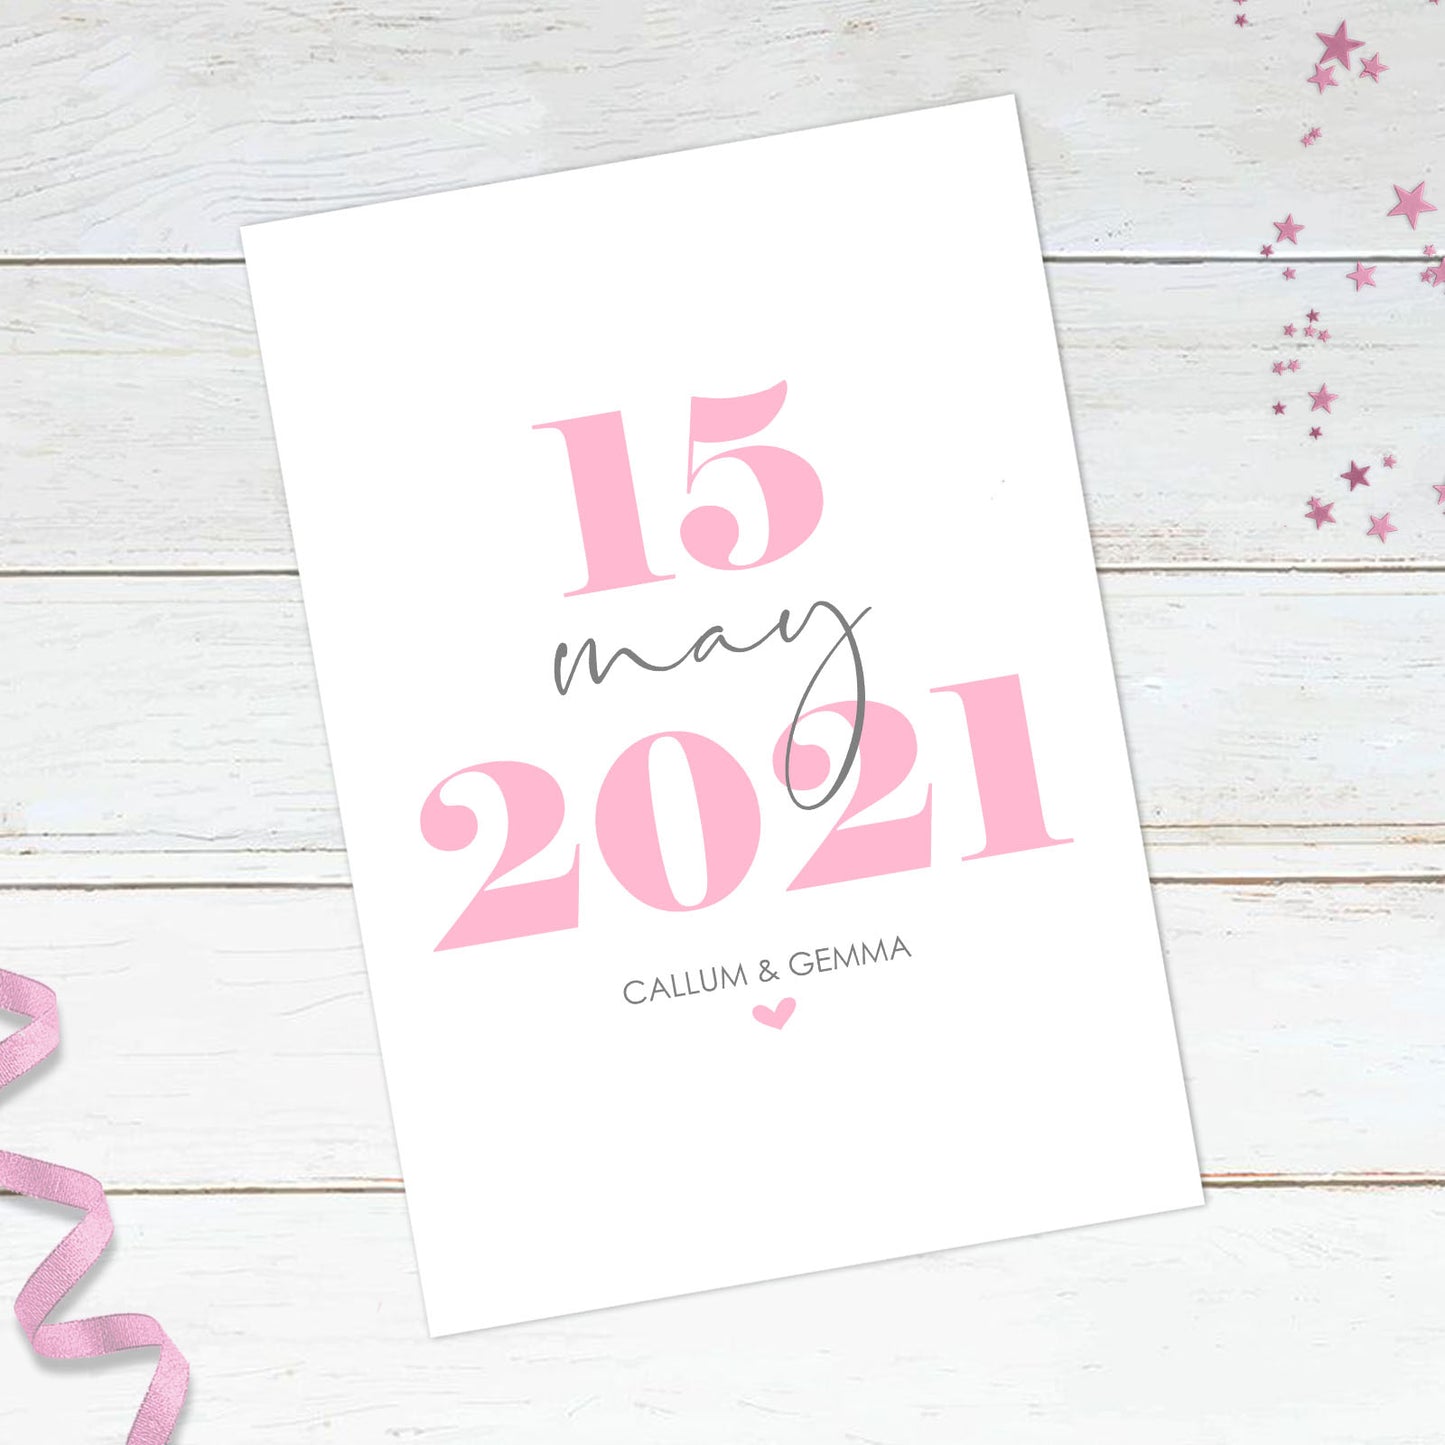 Personalised Special Date Print